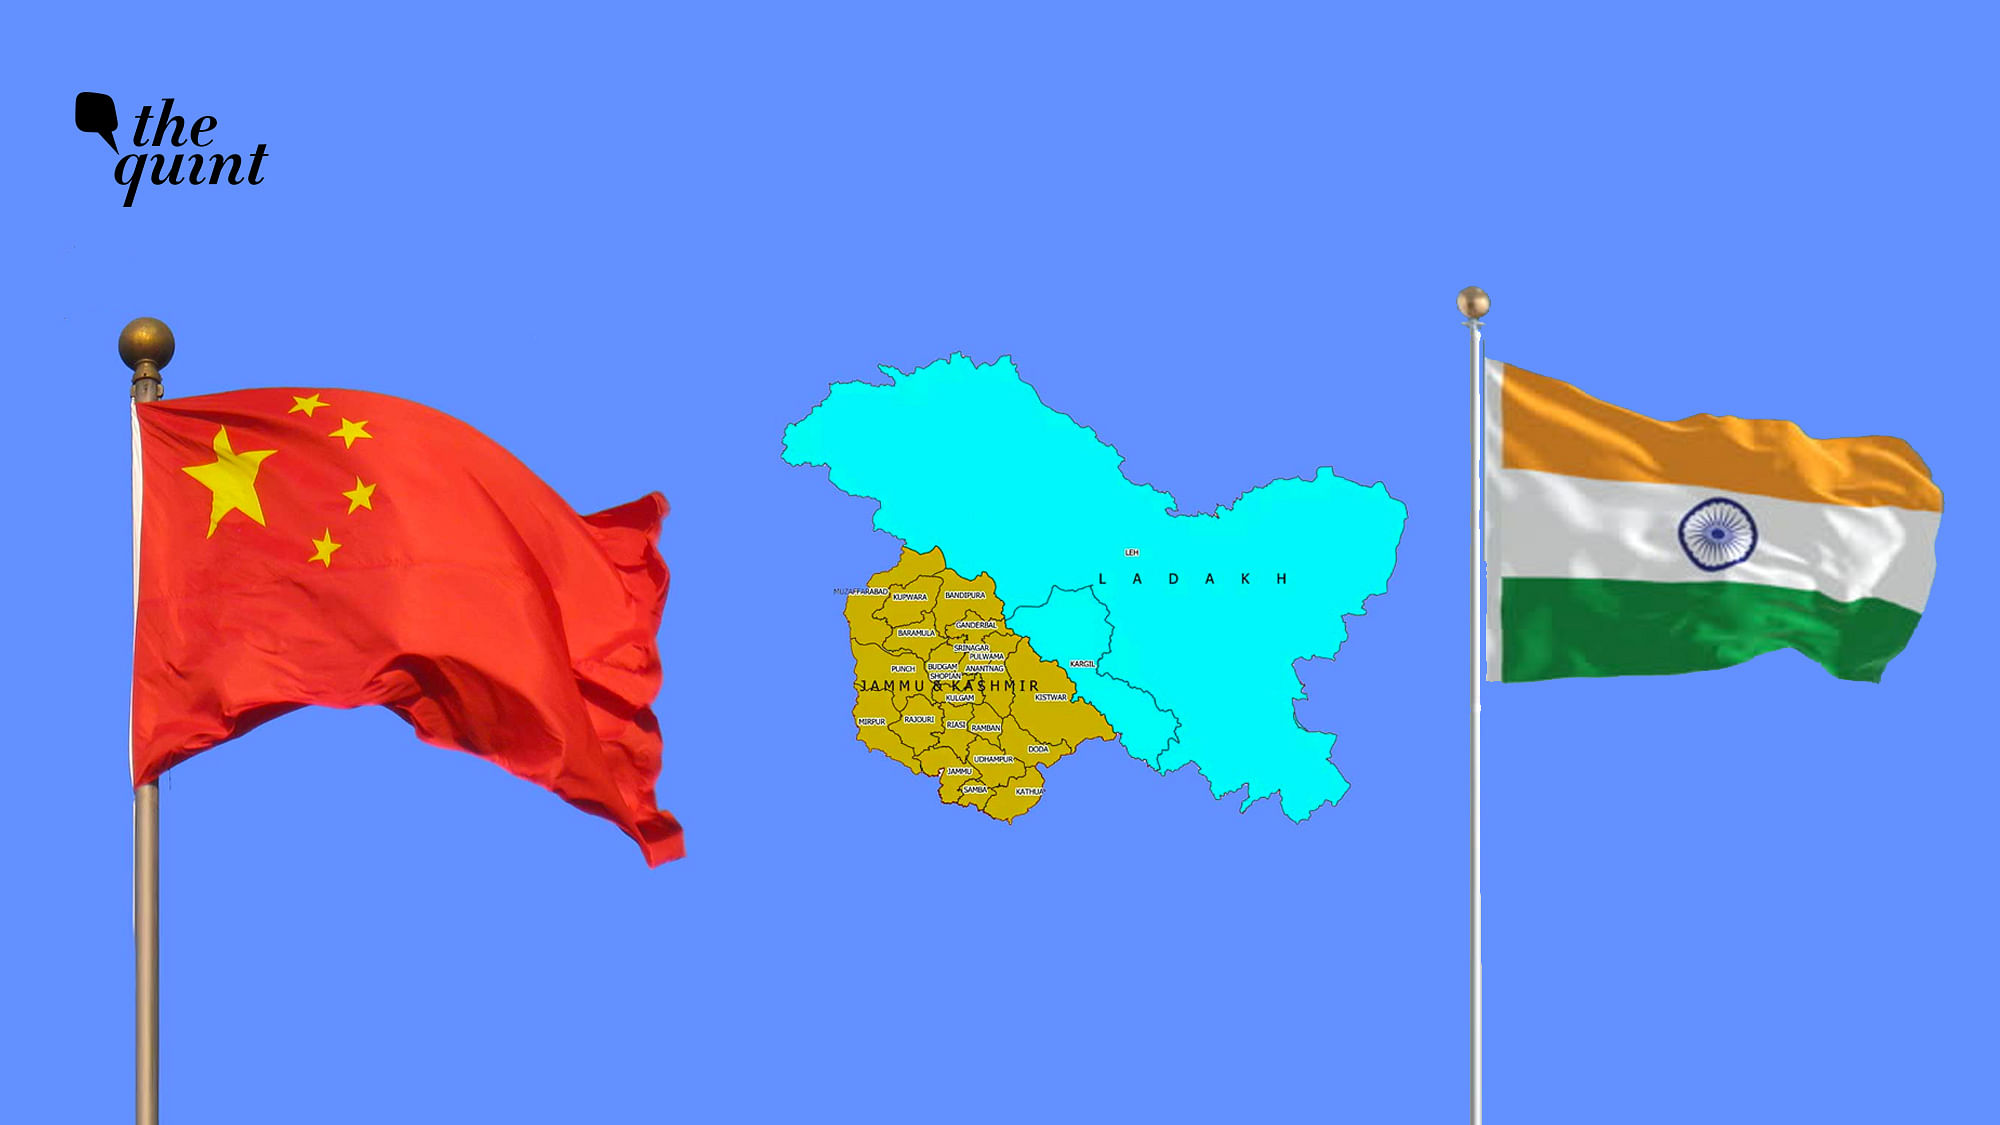 Image of China’s flag (L) and India’s flag (R), and maps of UTs of J&amp;K and Ladakh, used for representational purposes.